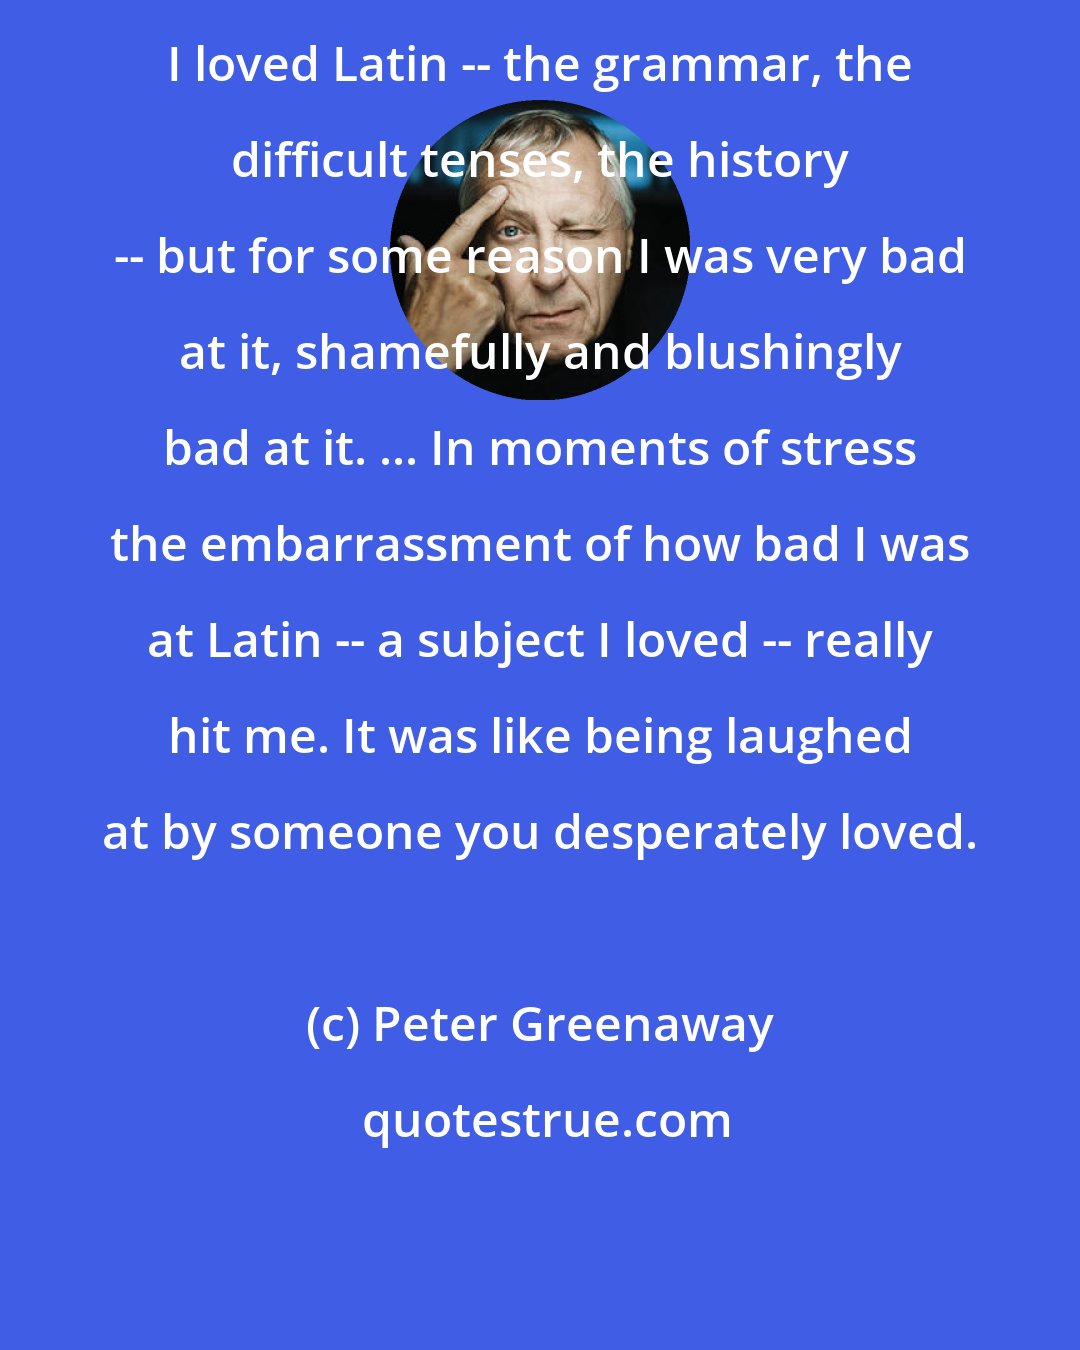 Peter Greenaway: I loved Latin -- the grammar, the difficult tenses, the history -- but for some reason I was very bad at it, shamefully and blushingly bad at it. ... In moments of stress the embarrassment of how bad I was at Latin -- a subject I loved -- really hit me. It was like being laughed at by someone you desperately loved.